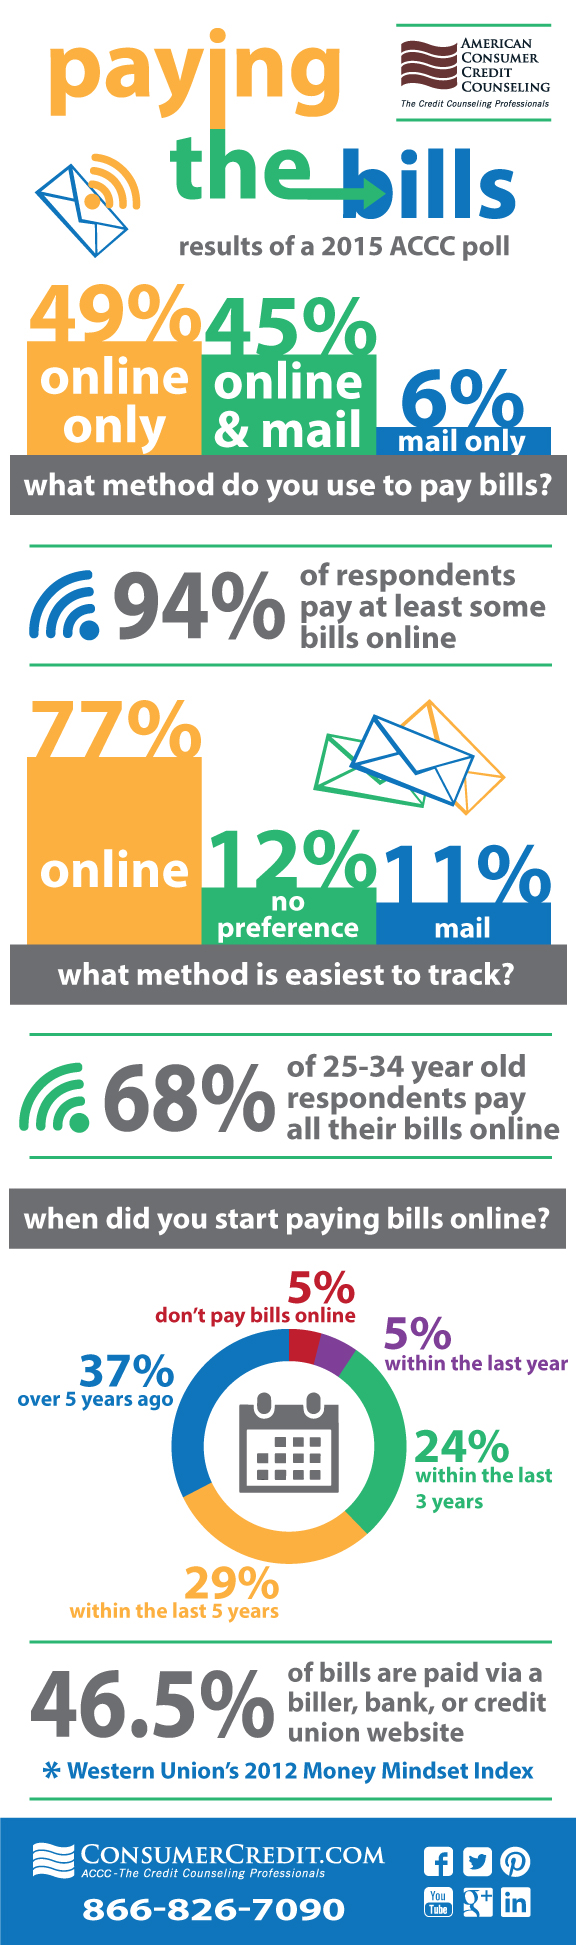 How do you pay bills online?